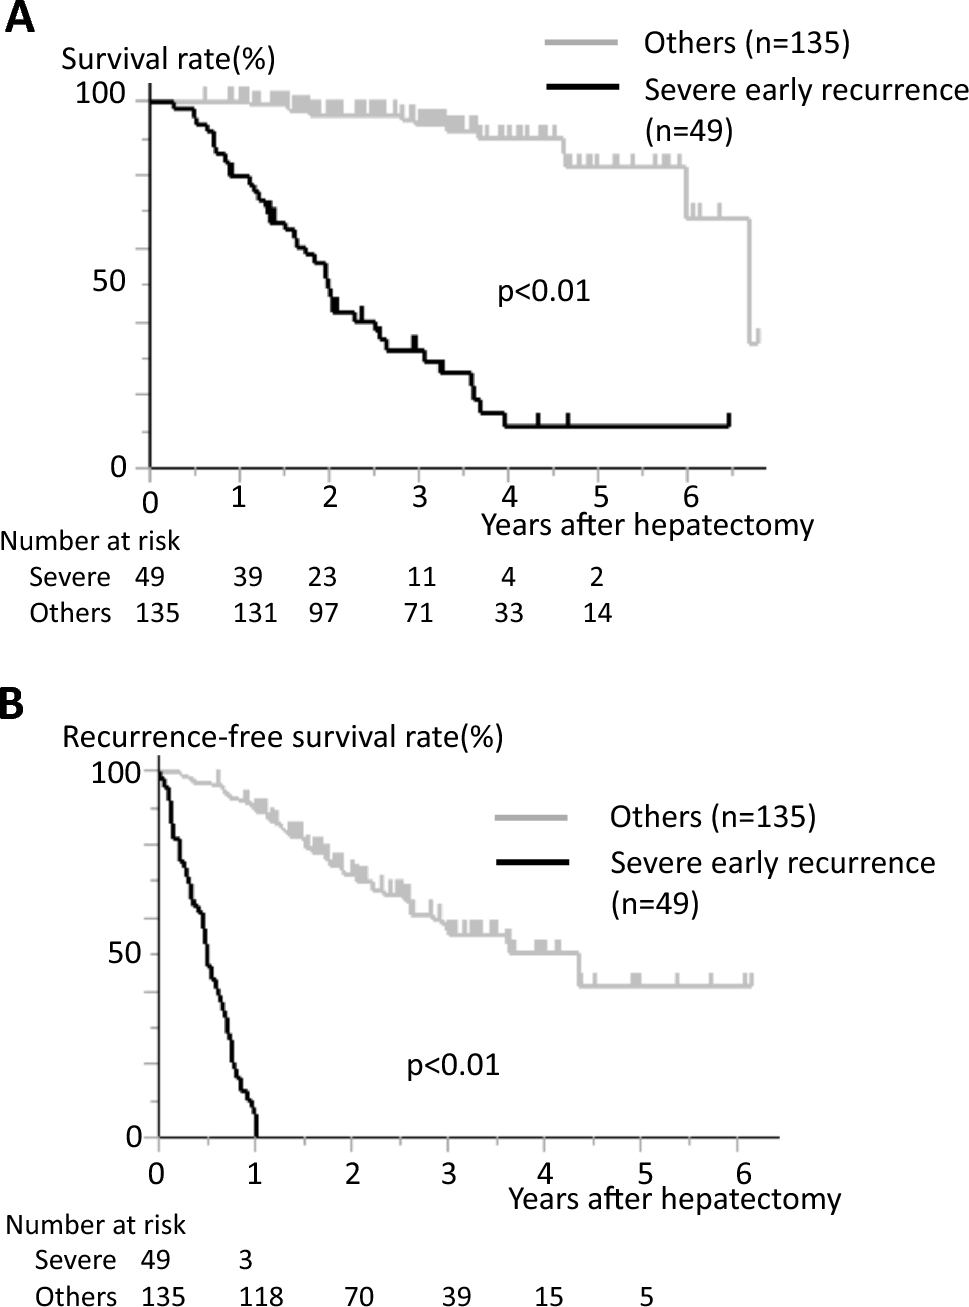 Predictors for early recurrence beyond up-to-7 or distant metastasis after hepatocellular carcinoma resection: proposal for borderline resectable HCC